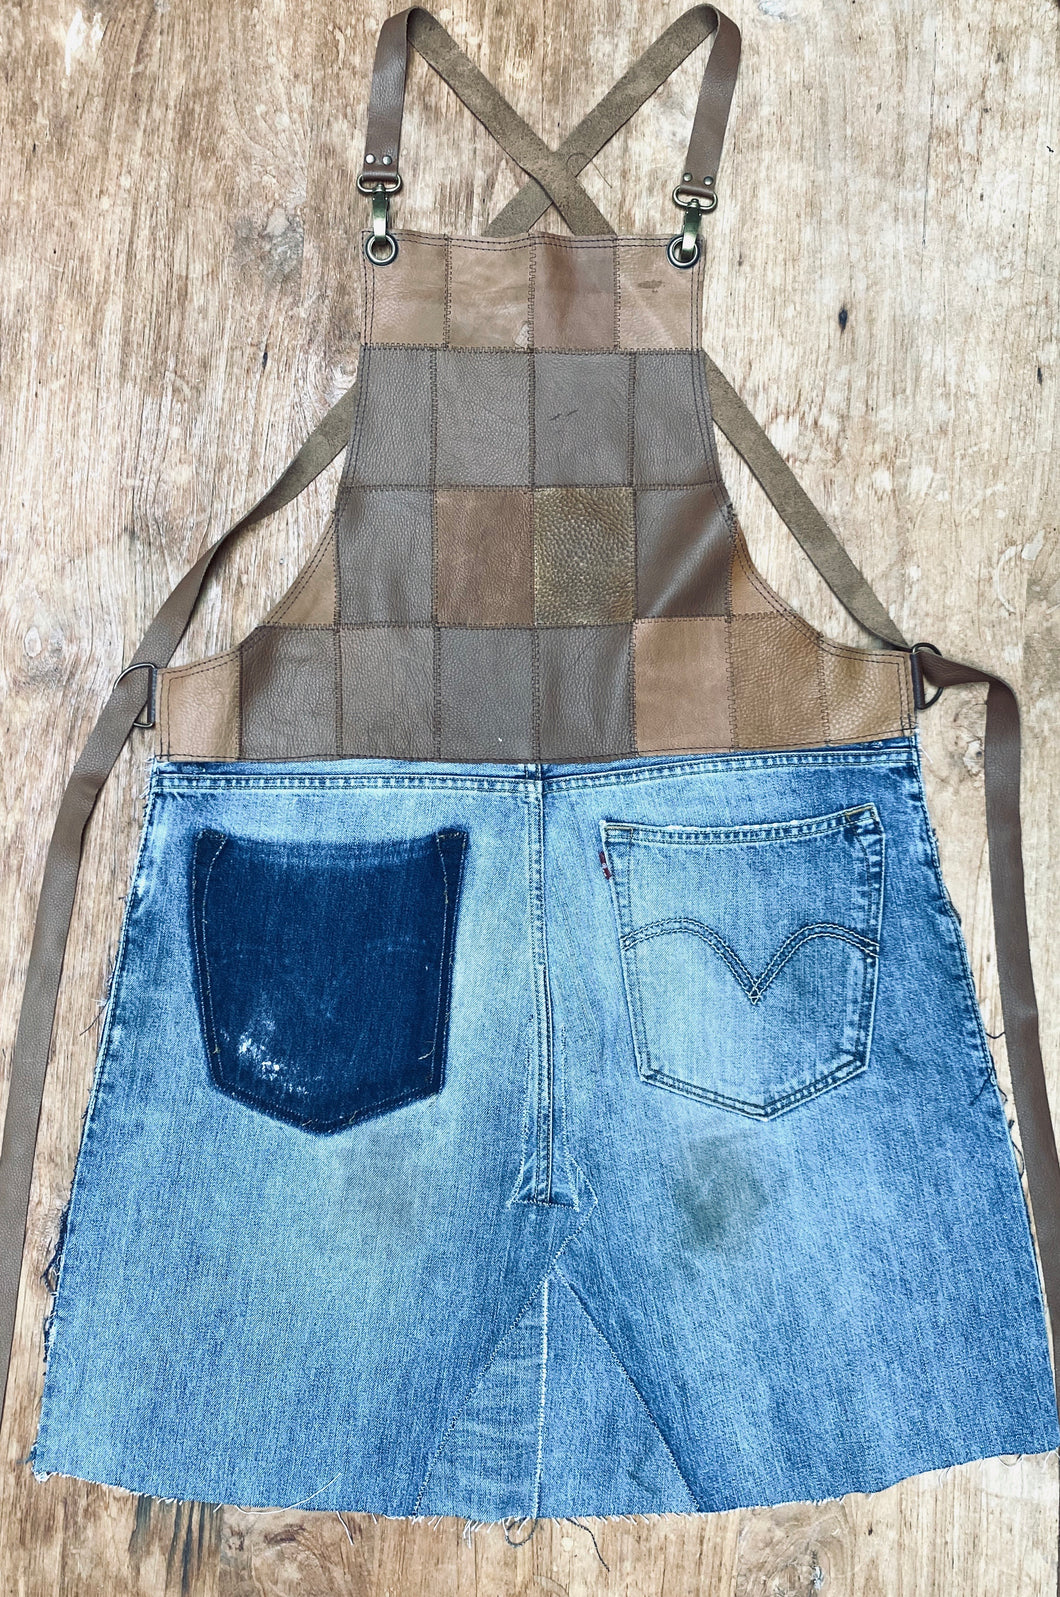 Upcycled leather, Levi denim fabric. The fully recycled handmade apron.